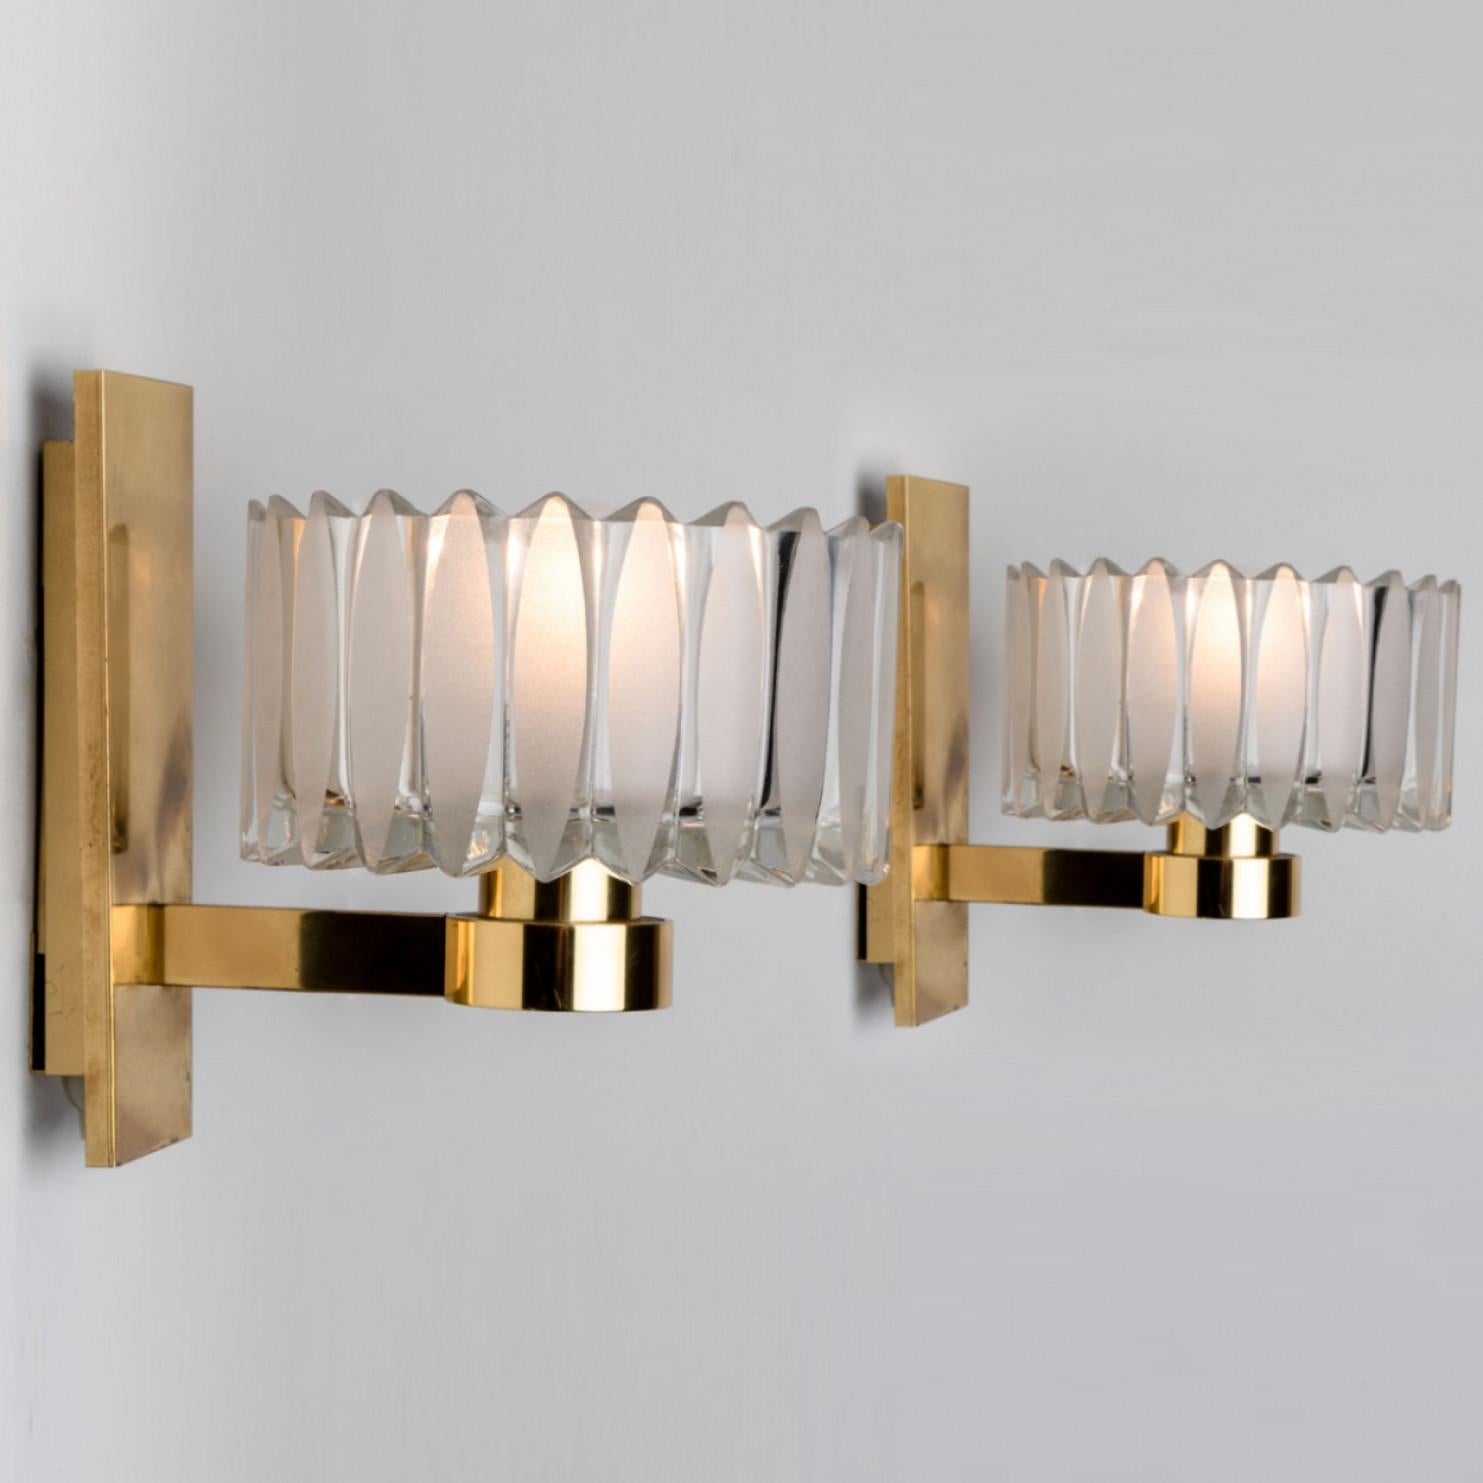 20th Century Pair of Hillebrand Brass and Glass Wall Light Fixtures, 1970s For Sale